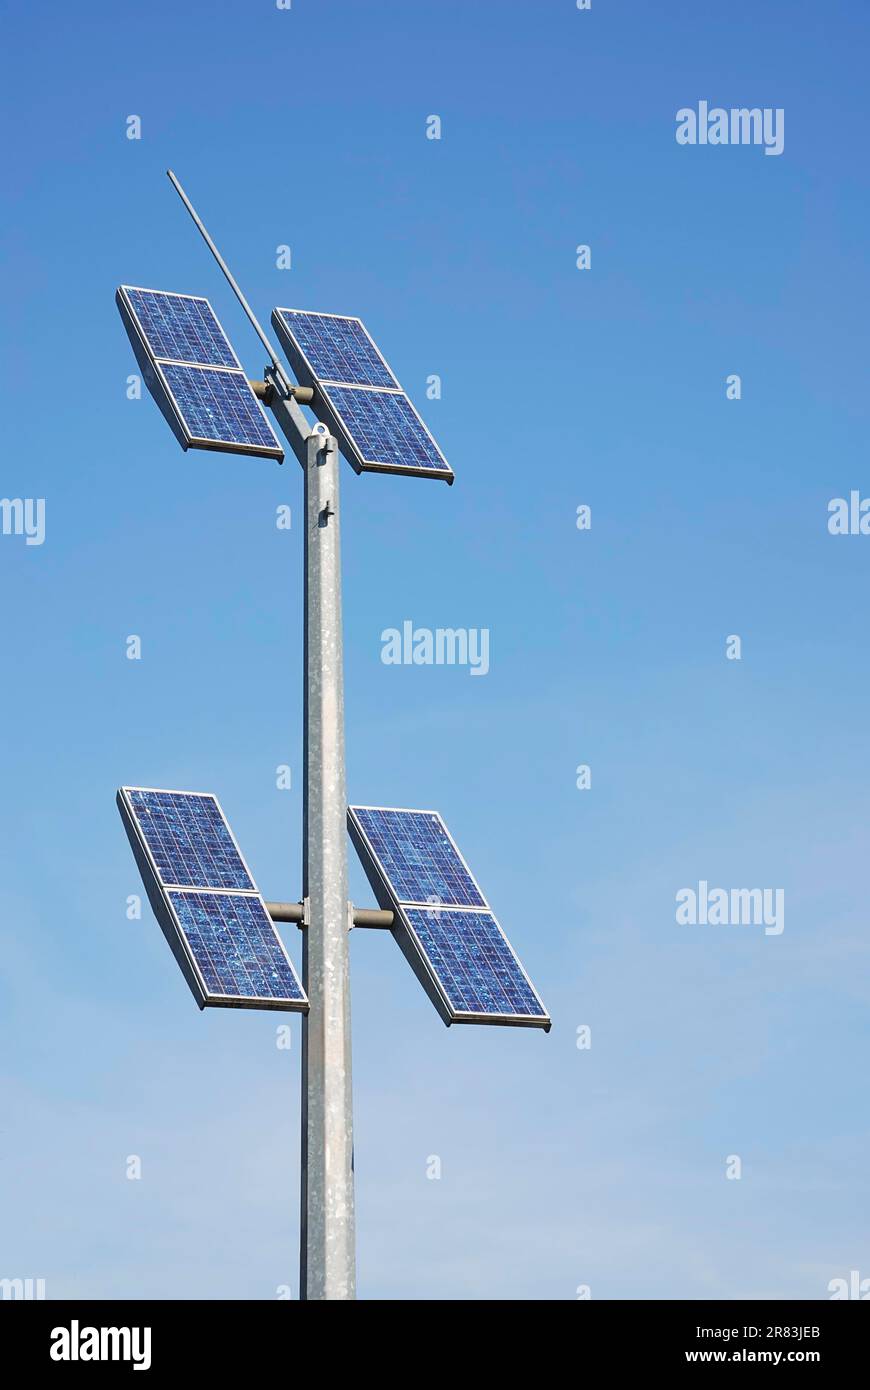 Renewable energy with photovoltaic technology Stock Photo